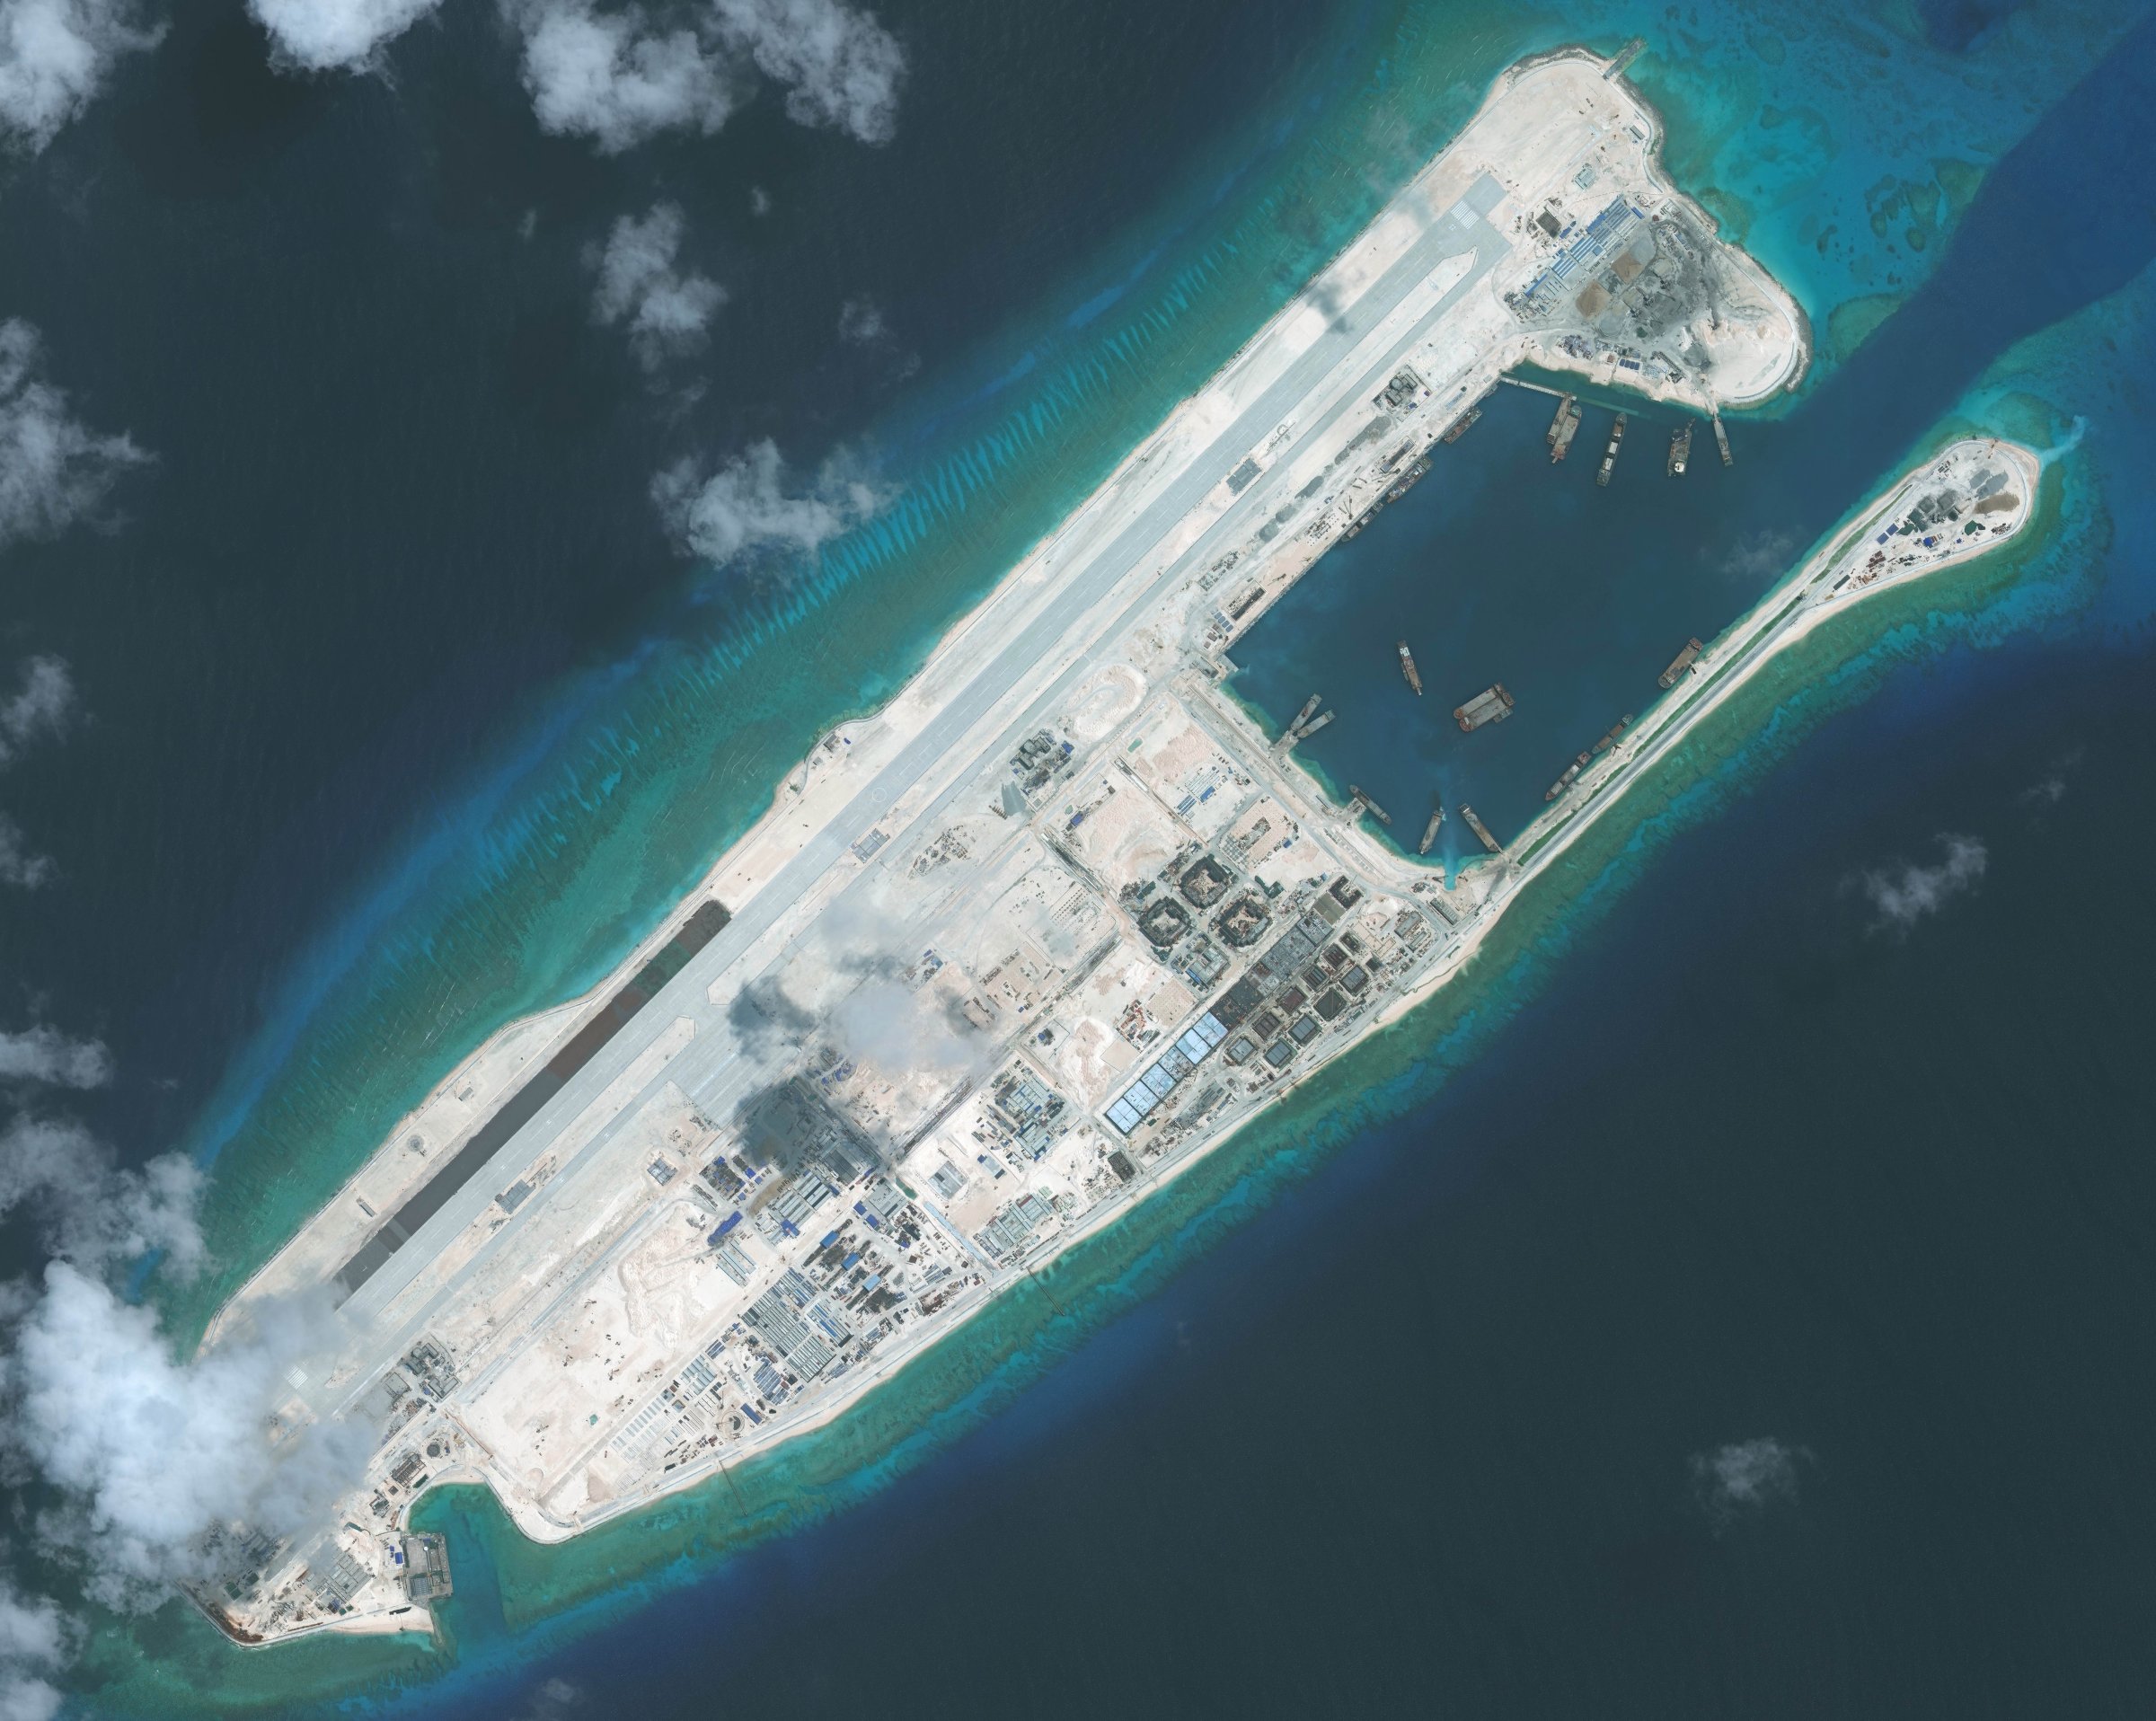 DigitalGlobe imagery of the nearly completed construction within the Fiery Cross Reef located in the South China Sea. Fiery Cross is located in the western part of the Spratly Islands group.  Photo DigitalGlobe via Getty Images.